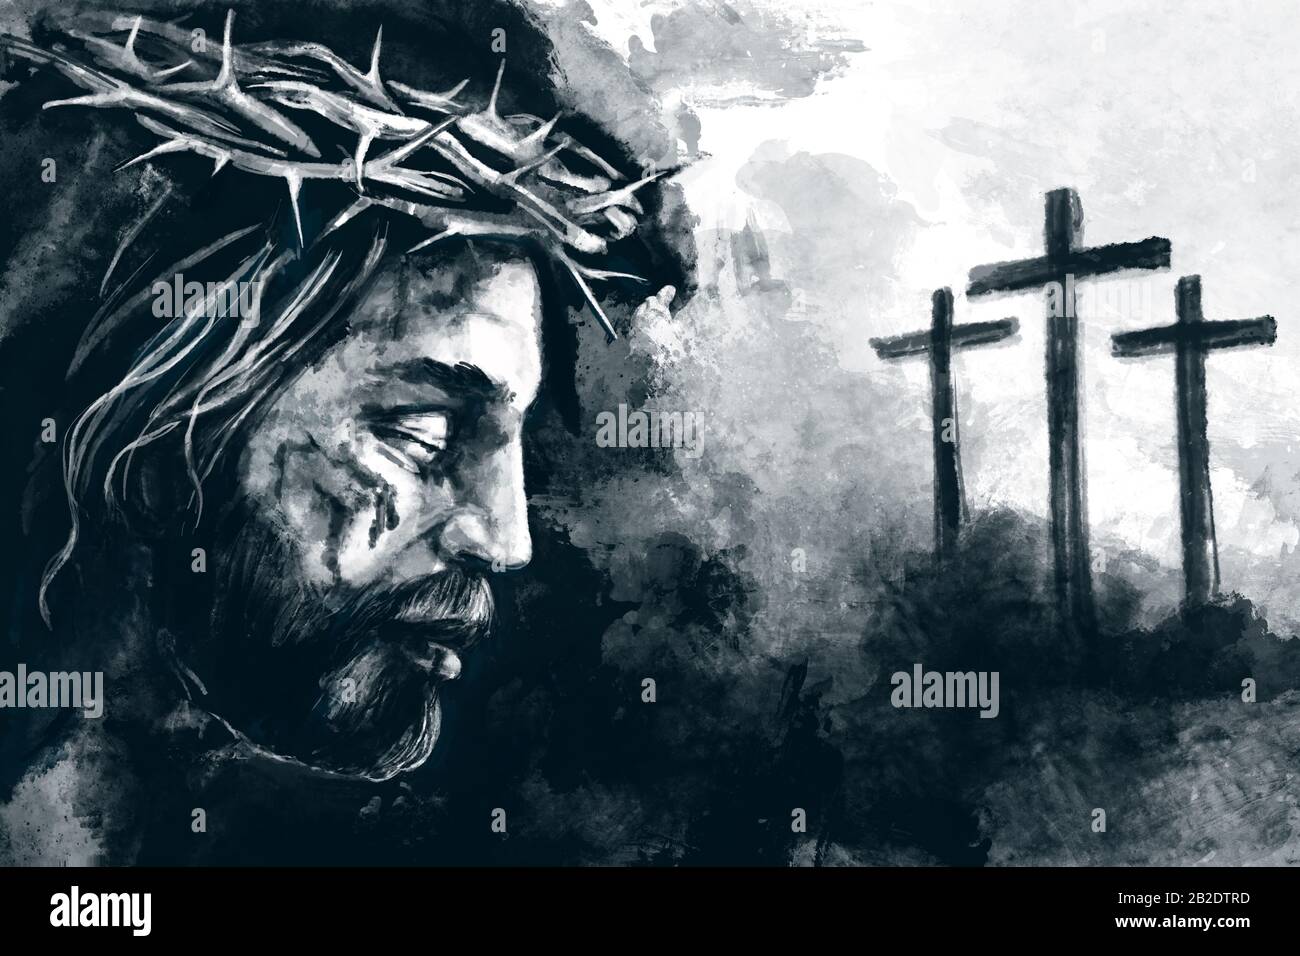 Easter. Jesus Christ, Son of God, crucifixion on the cross at Calvary, Friday. Christian symbol of faith, art illustration painted with watercolors. Stock Photo